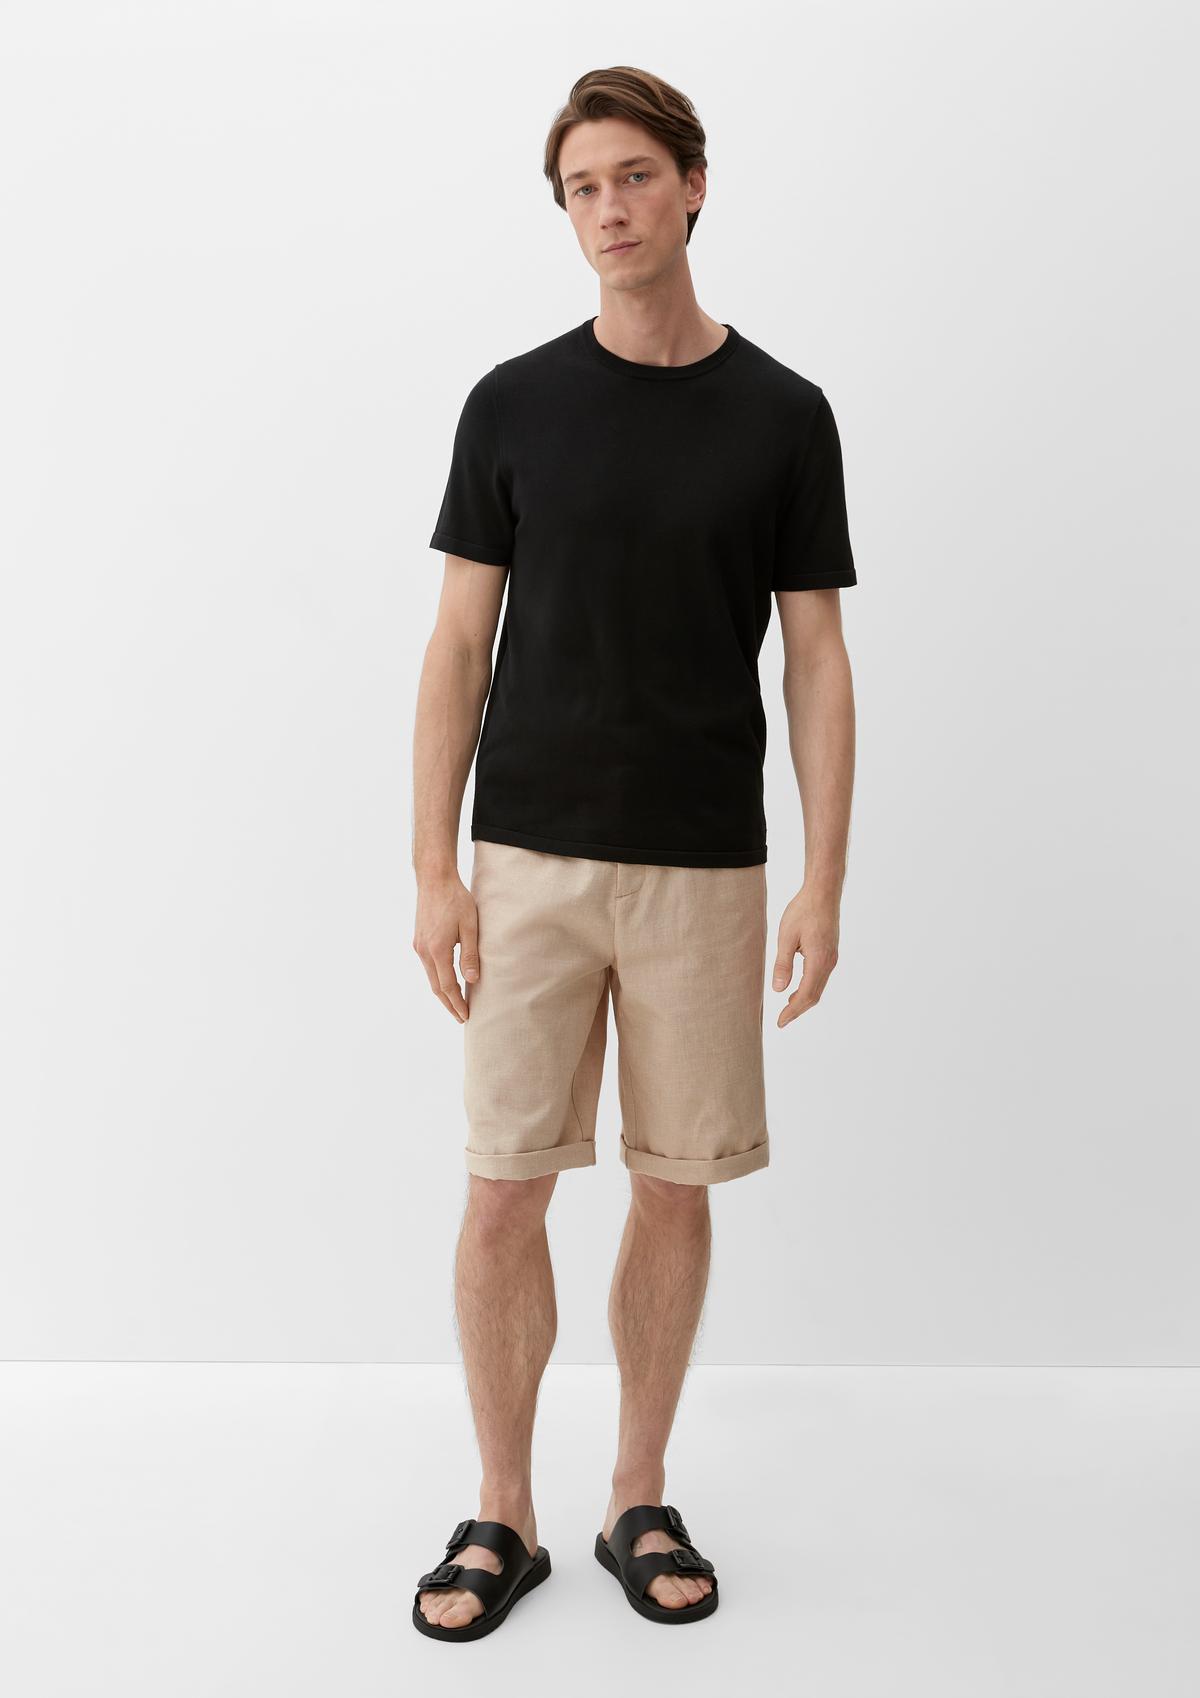 Bermuda shorts made of linen and cotton - sandstone | s.Oliver